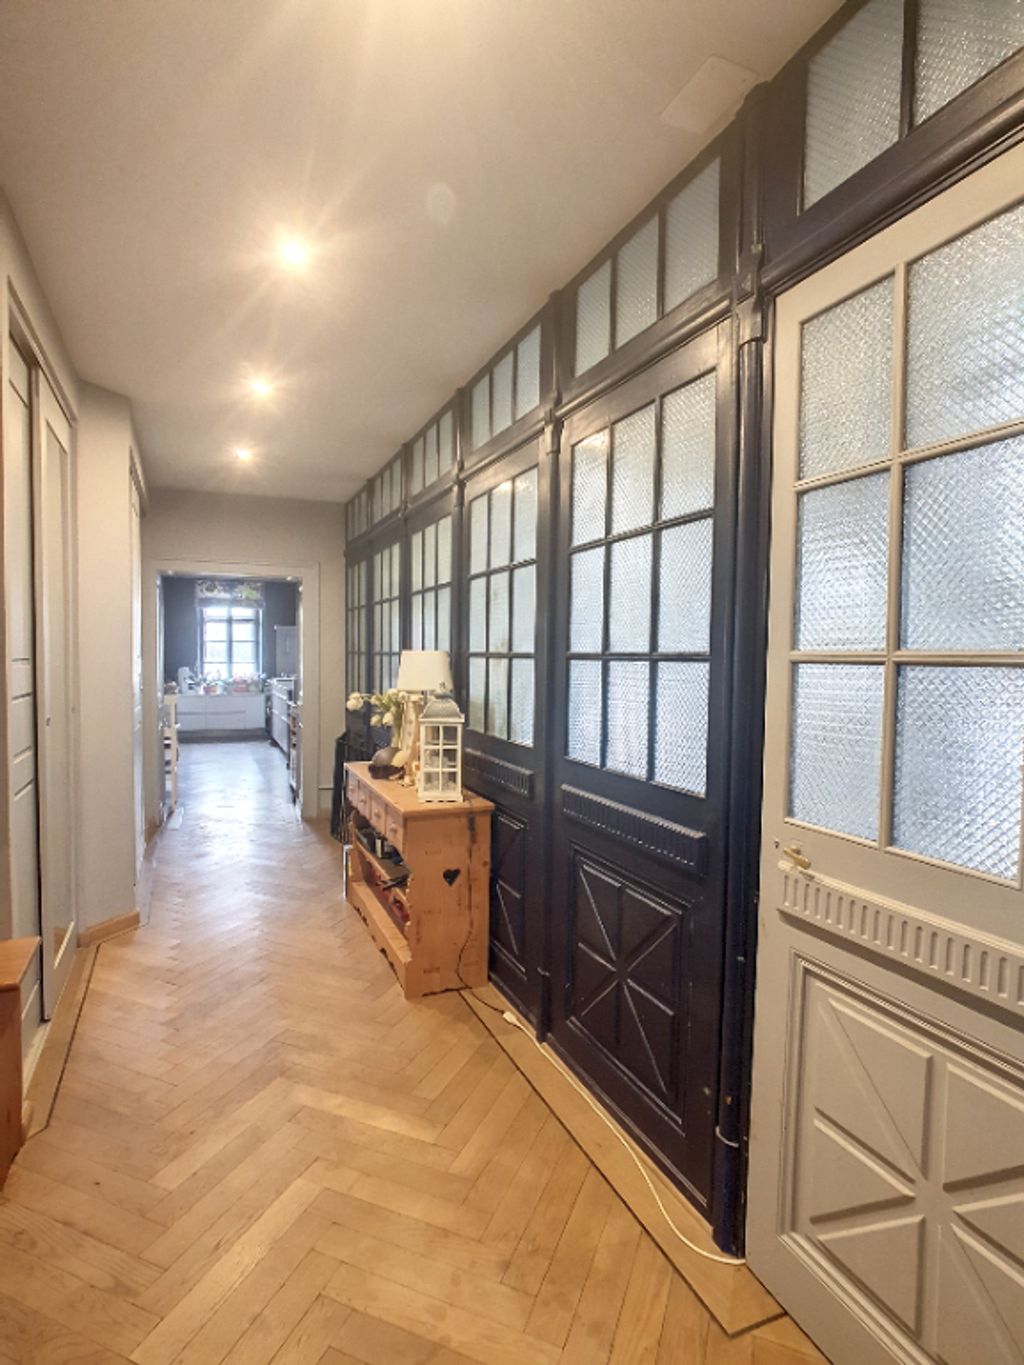 Achat appartement 5 pièces 152 m² - Thoiry